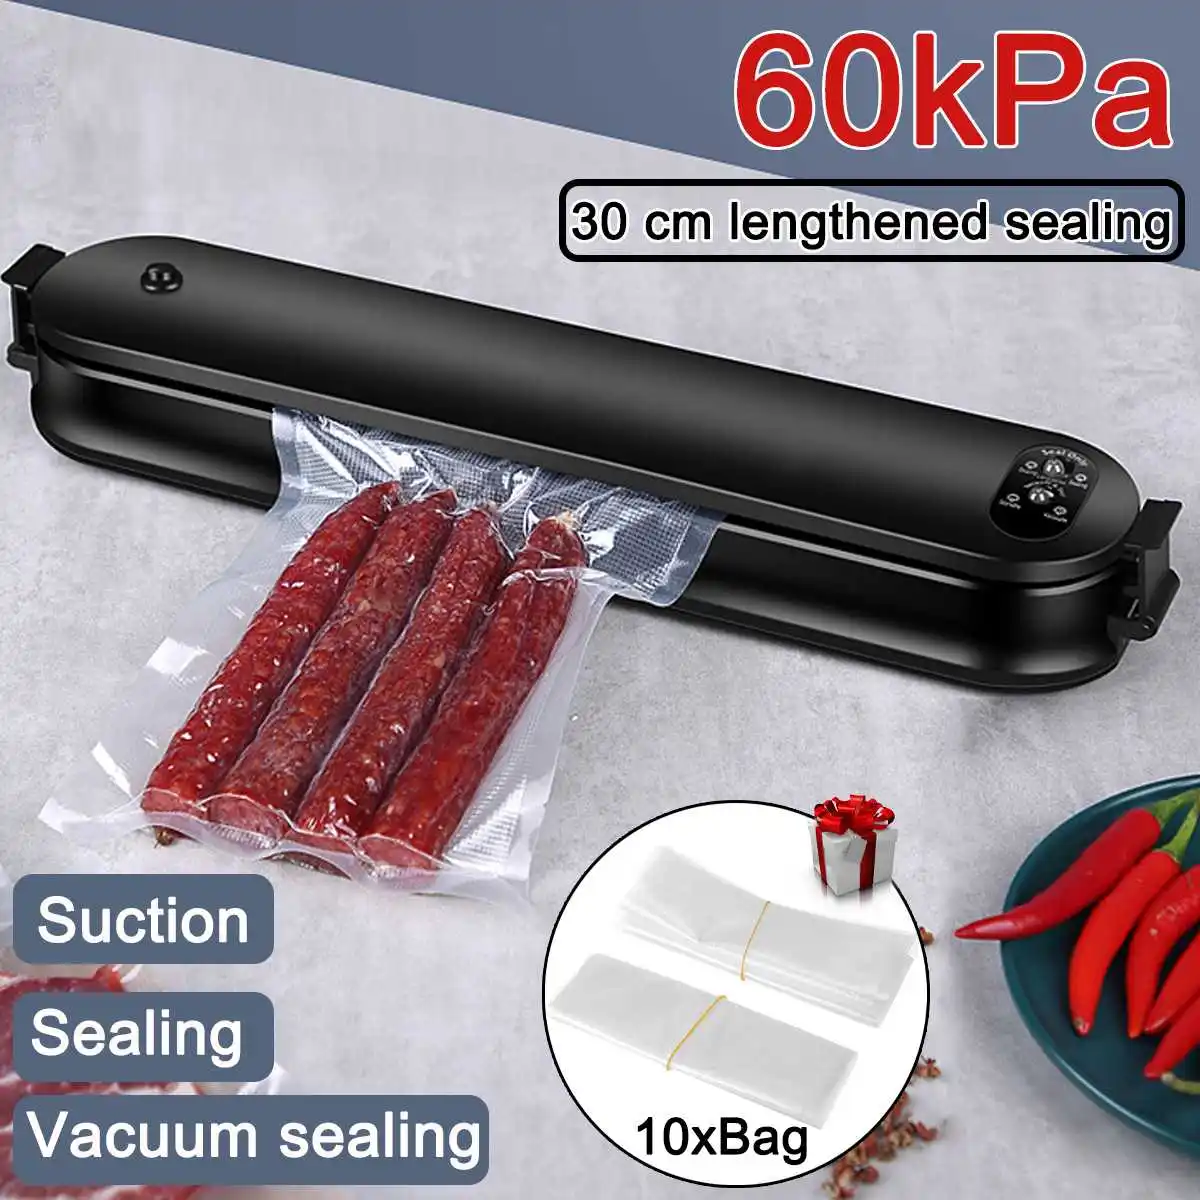 

3 in 1 100W Electric Vacuum Sealer Packaging Machine For Home Kitchen Including 10pcs Food Saver Bags Vacuum Food Sealing 220V